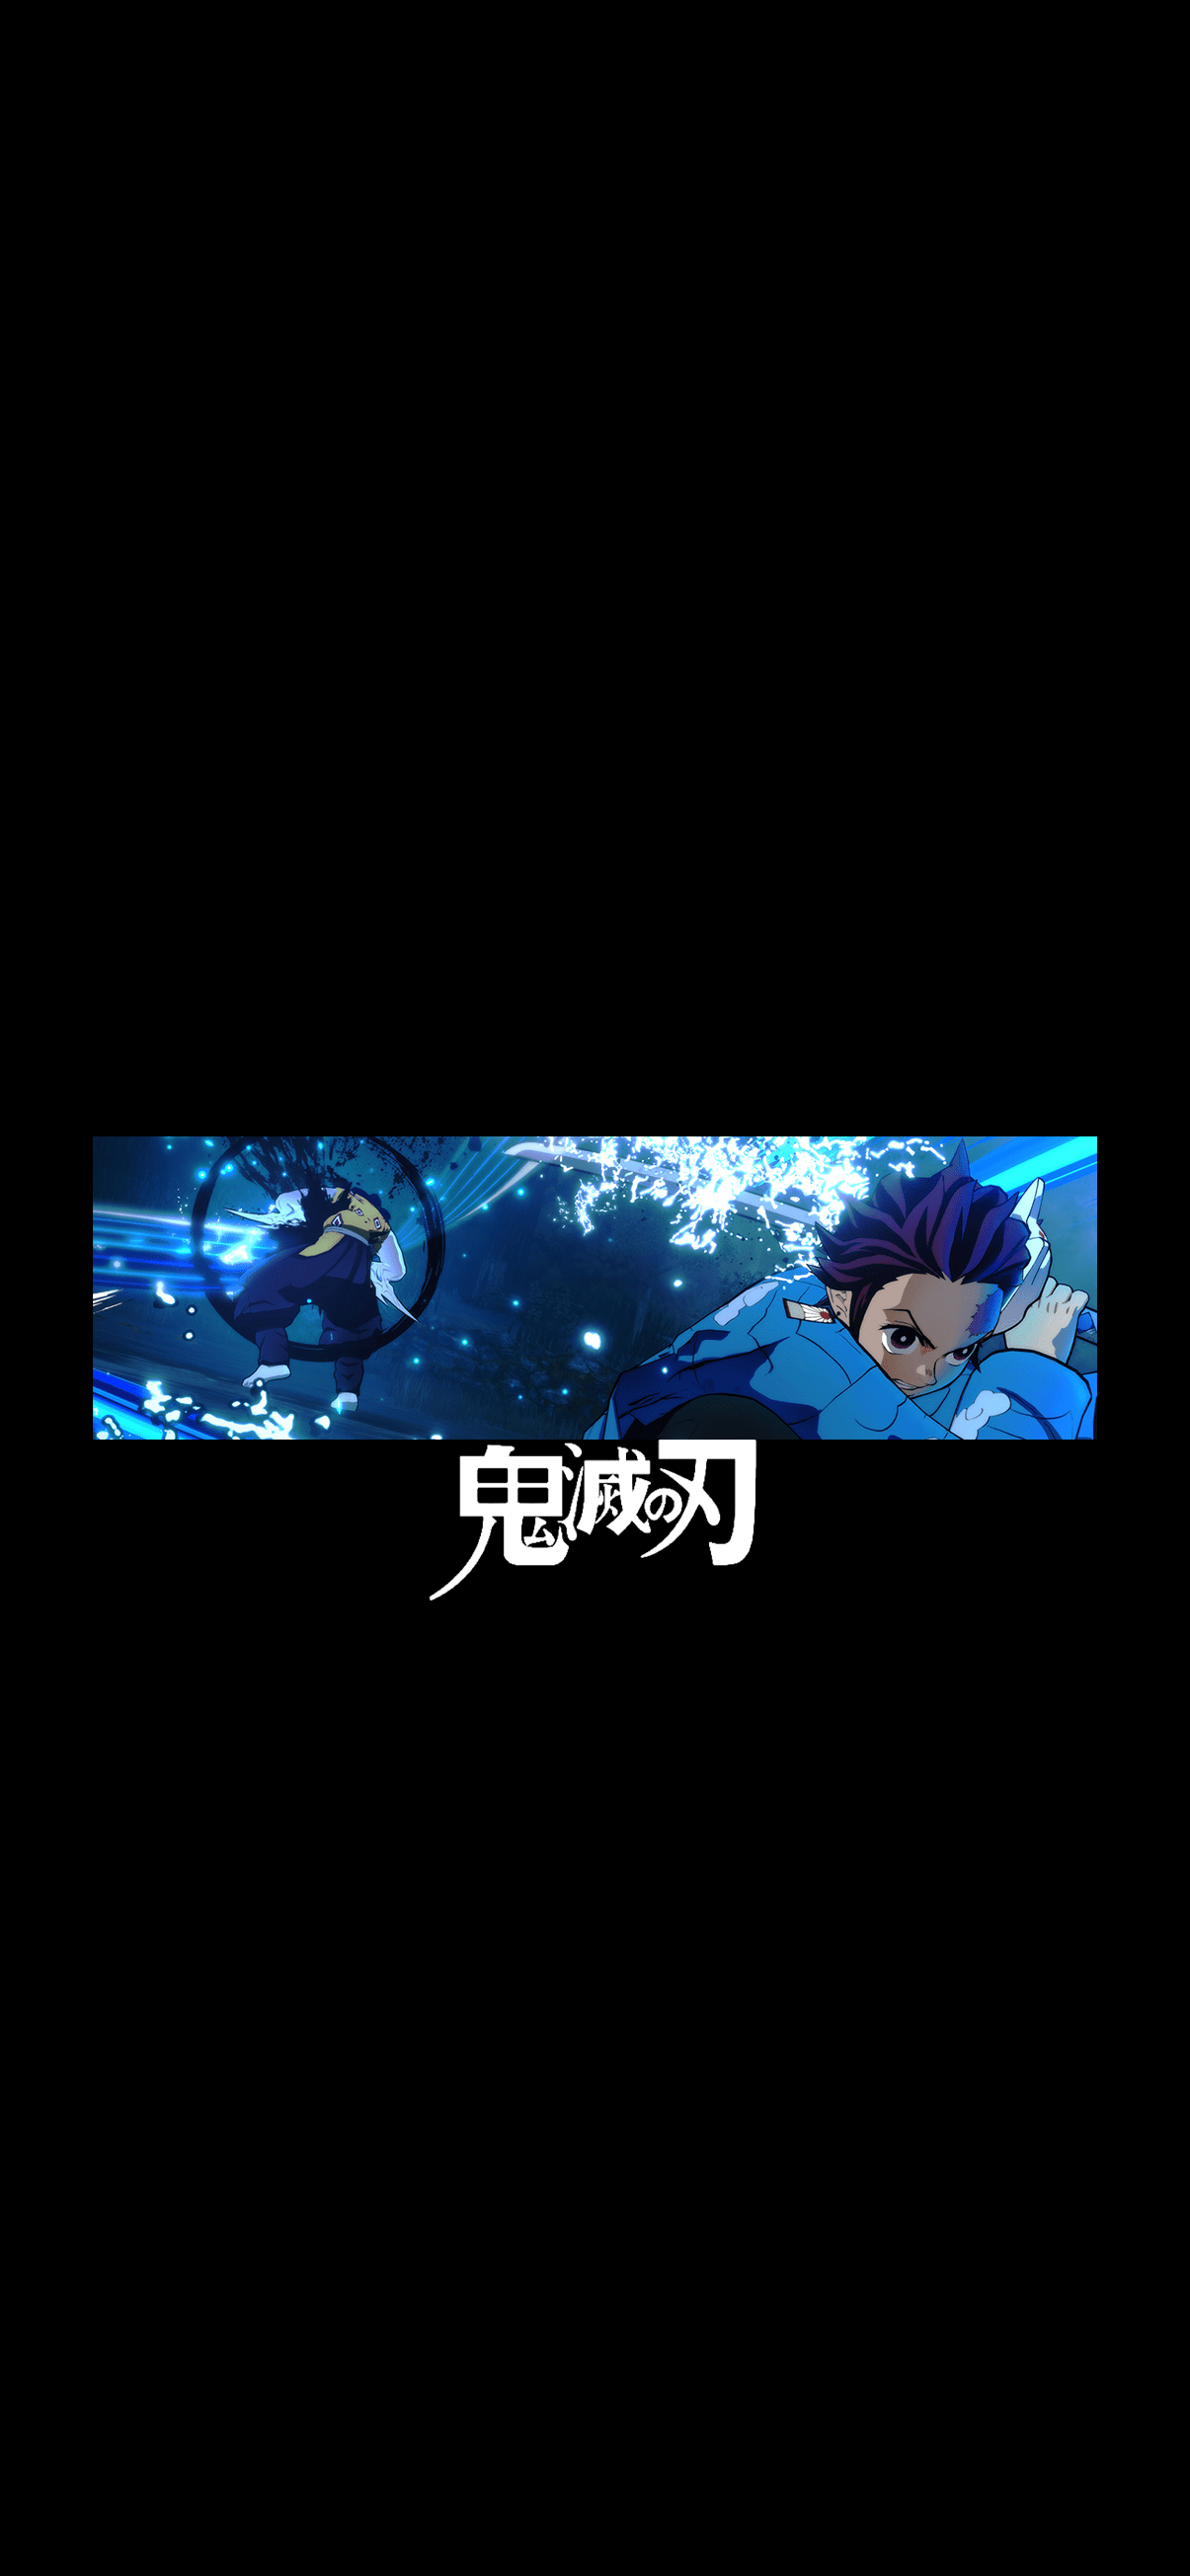 Anime wallpaper with a blue background and the words, 'animal' - Demon Slayer